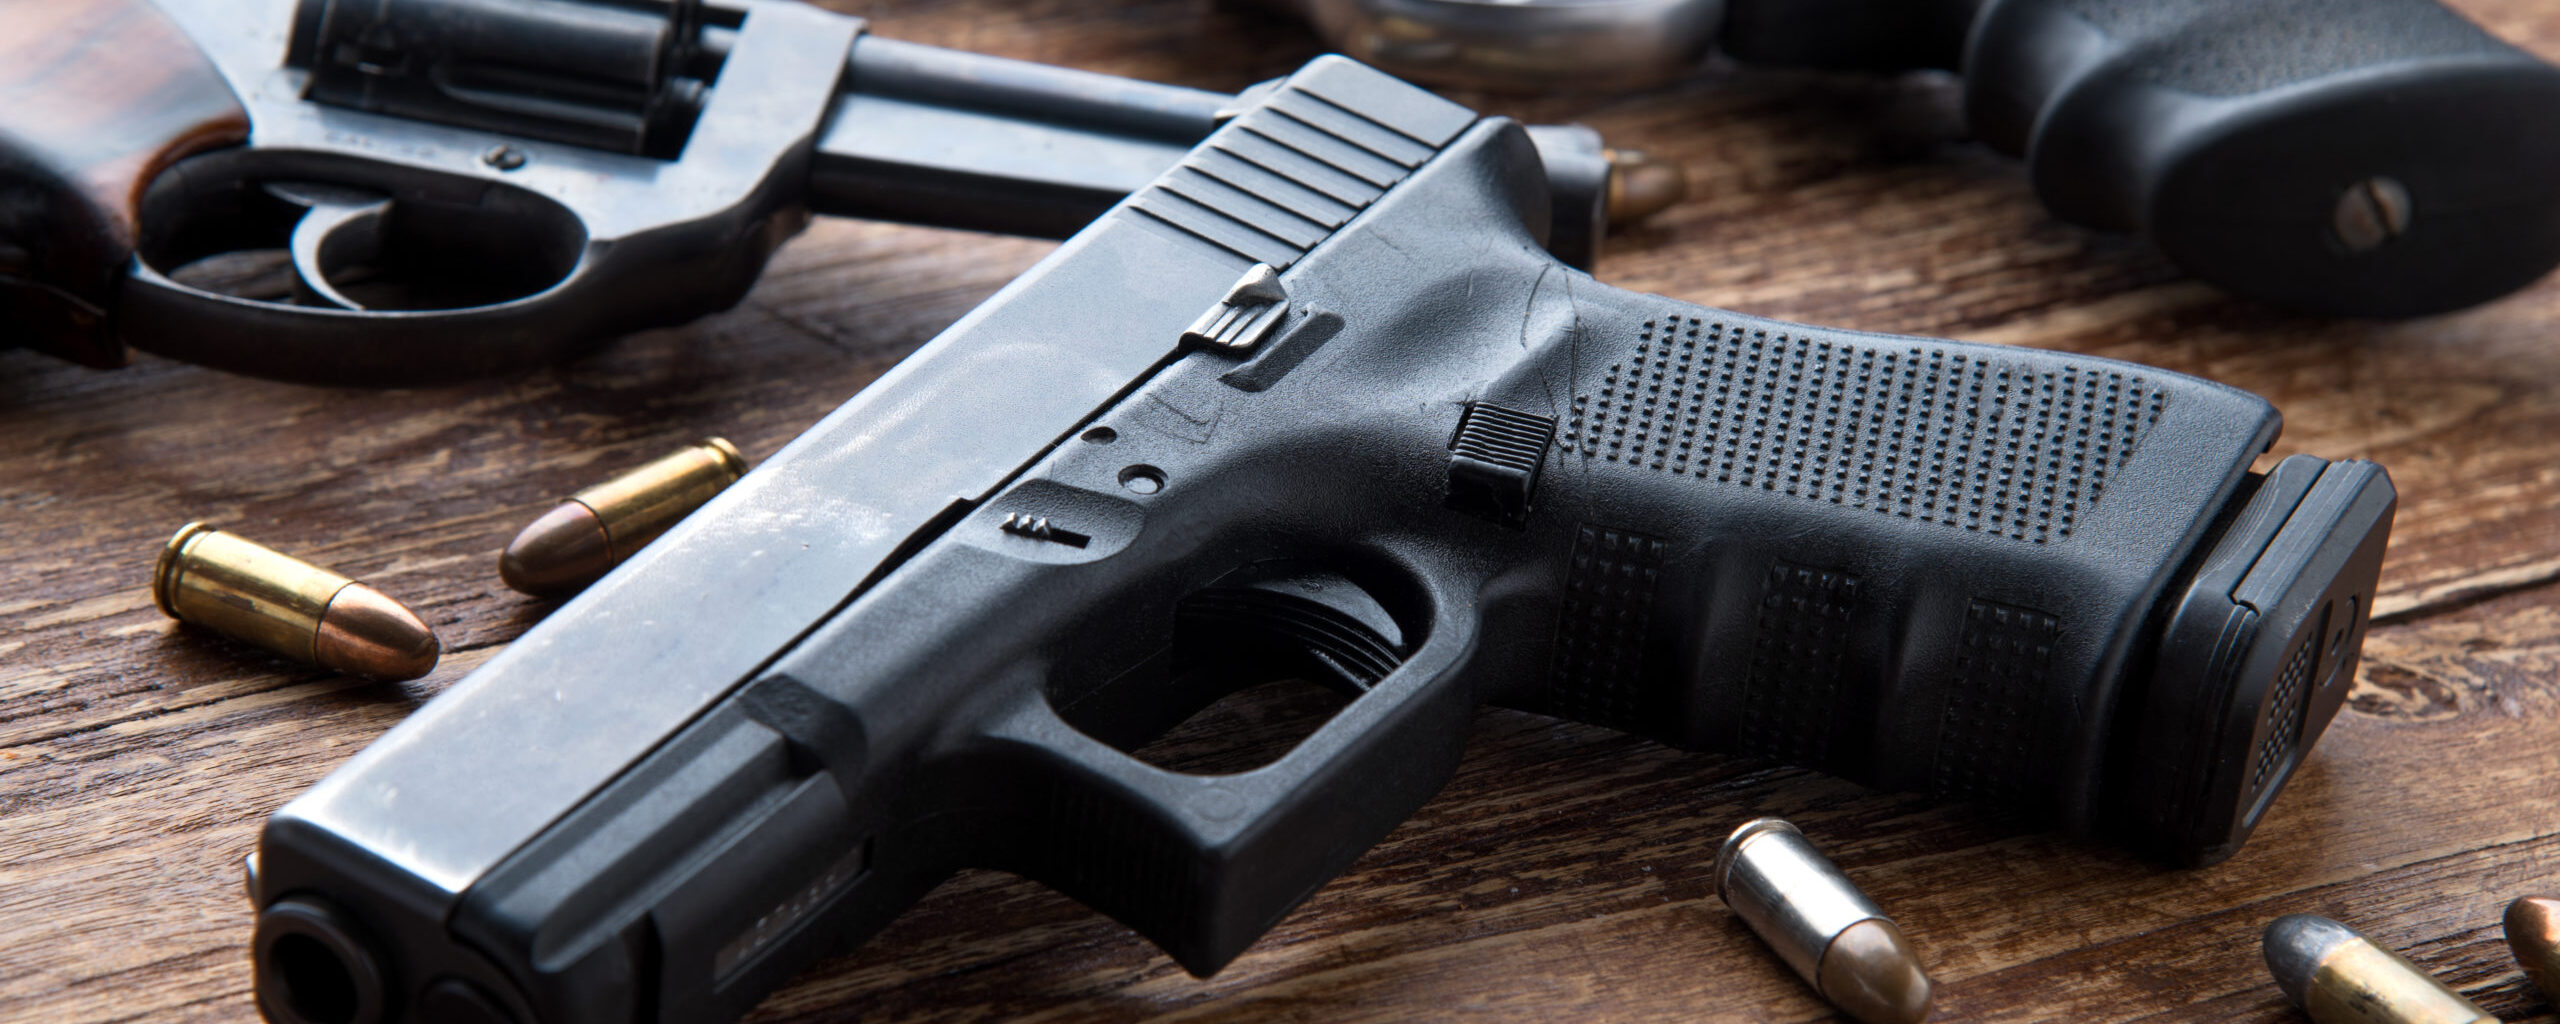 Compact Pistols vs. Full Size: Does Size Matter?